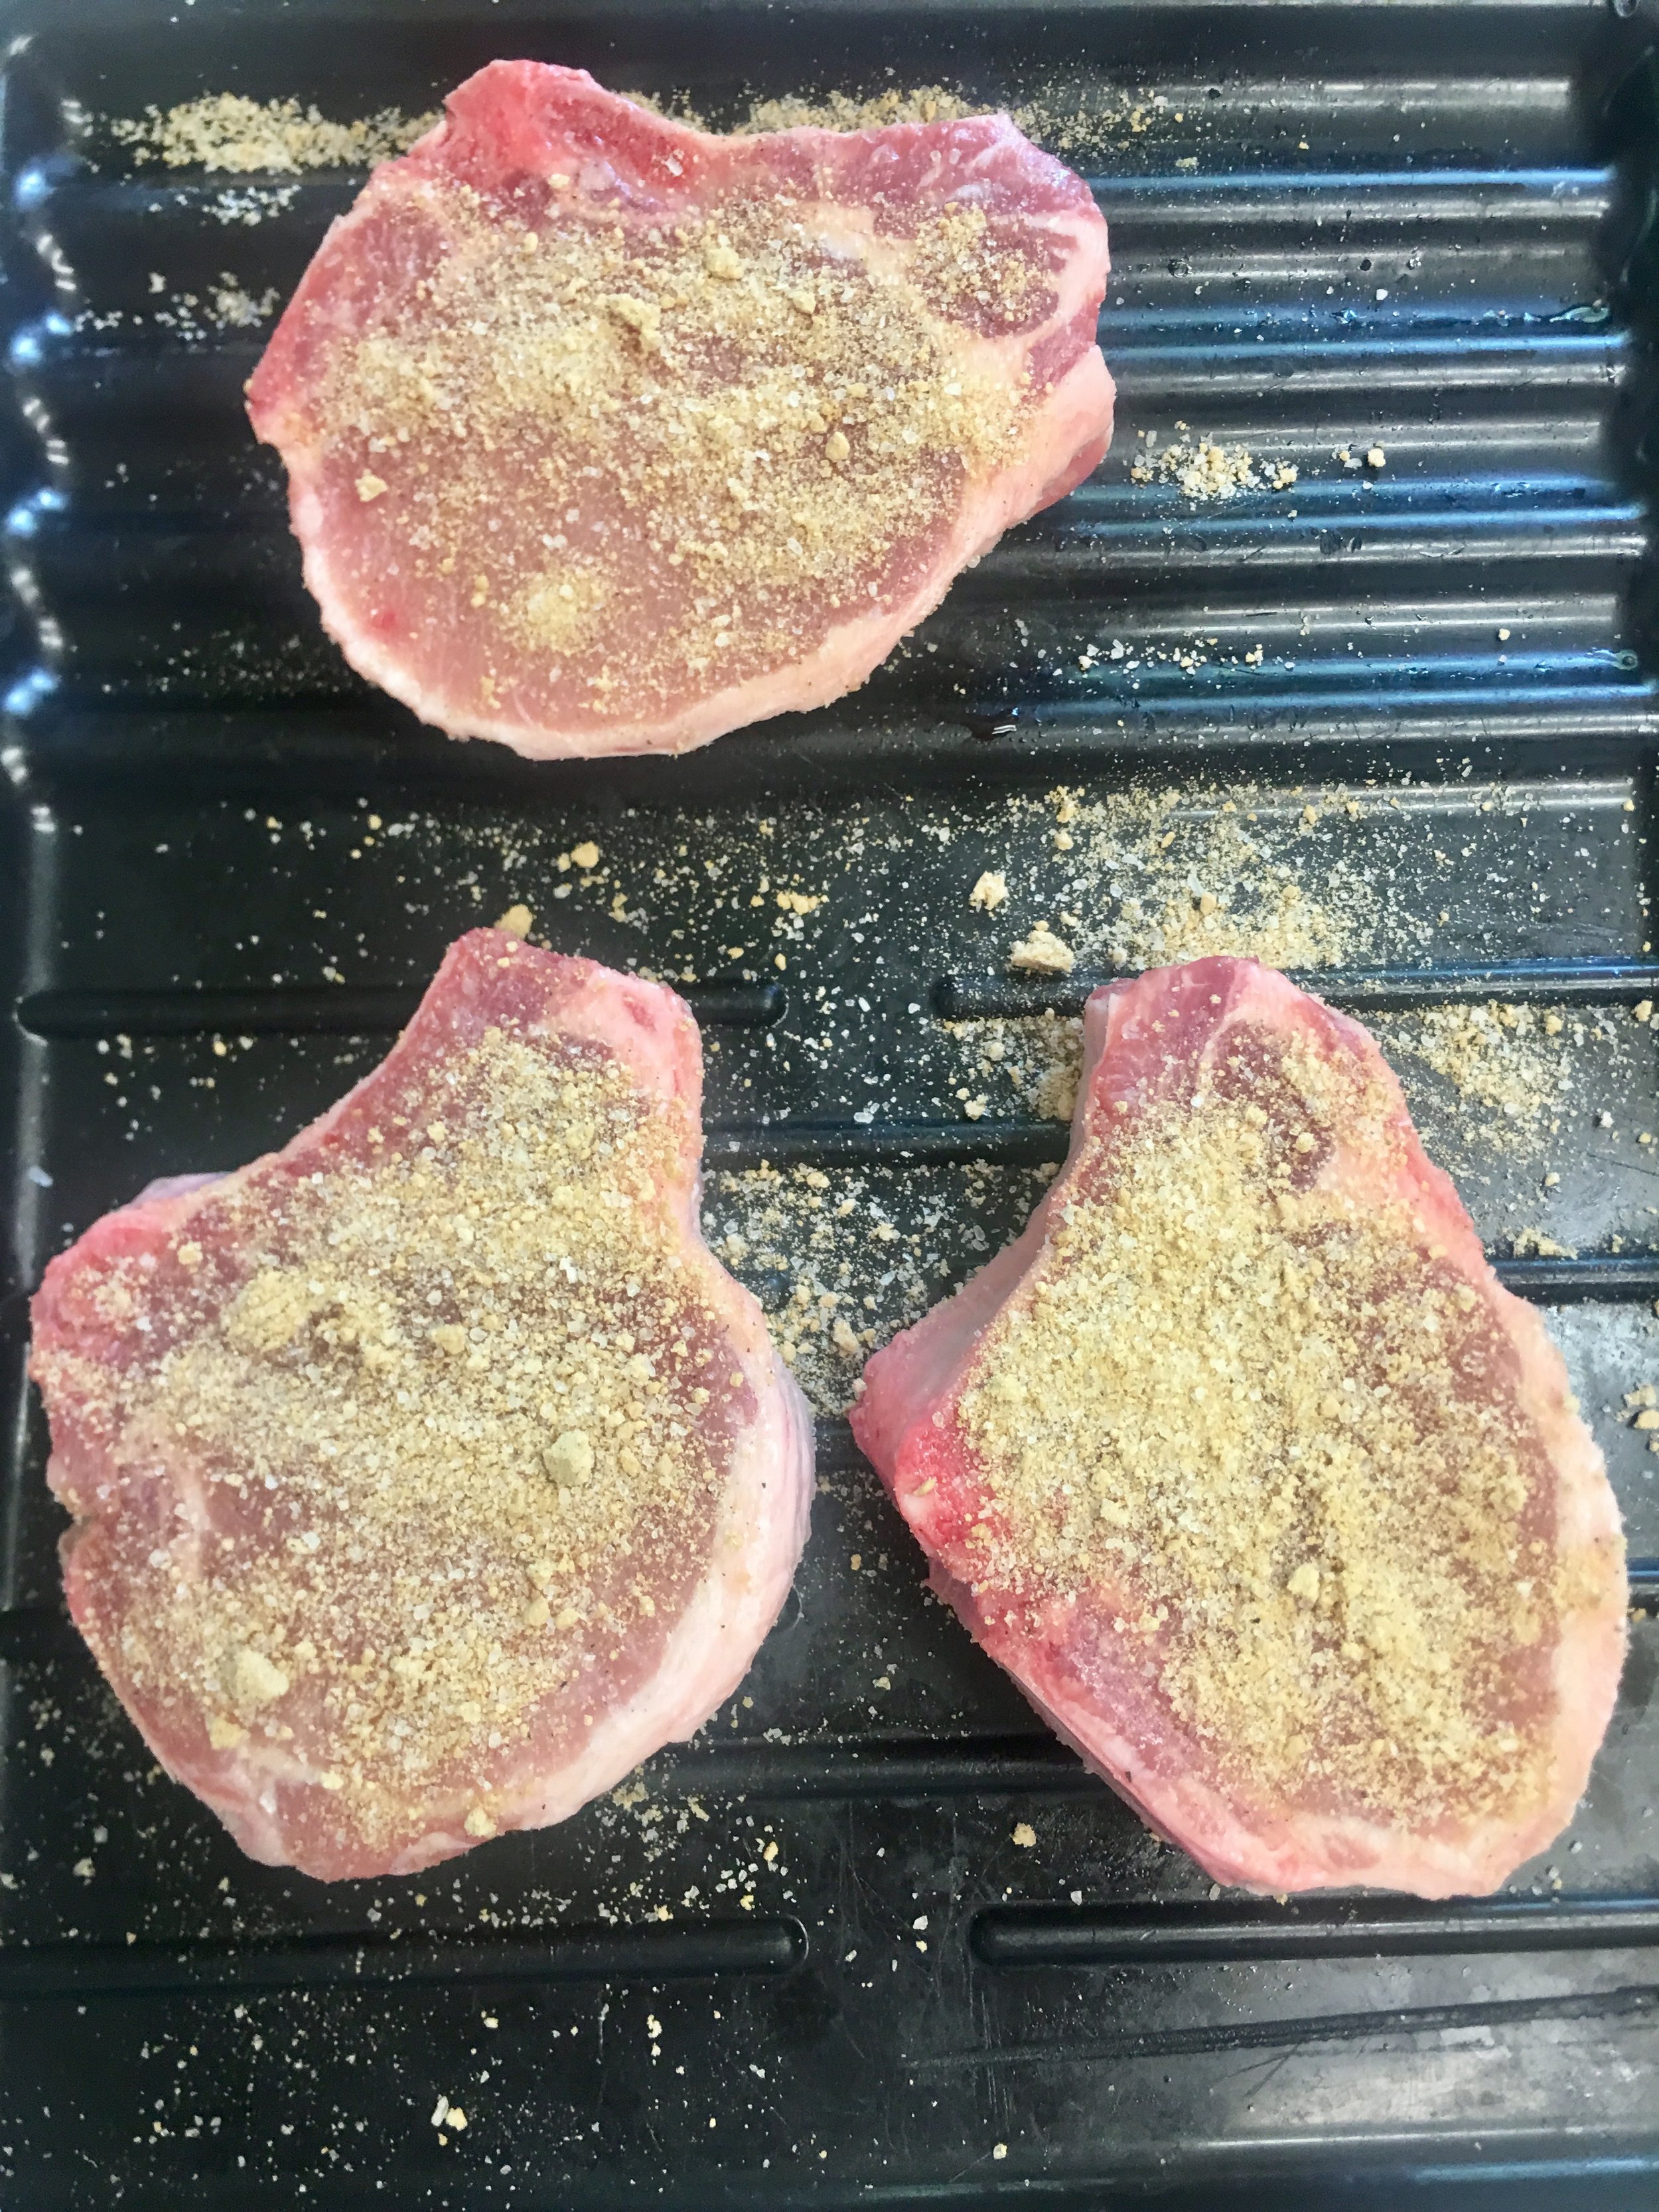 Dry Brined Smoked Pork Chops Naturiffic,Pictures Of Virginia Creeper Plant